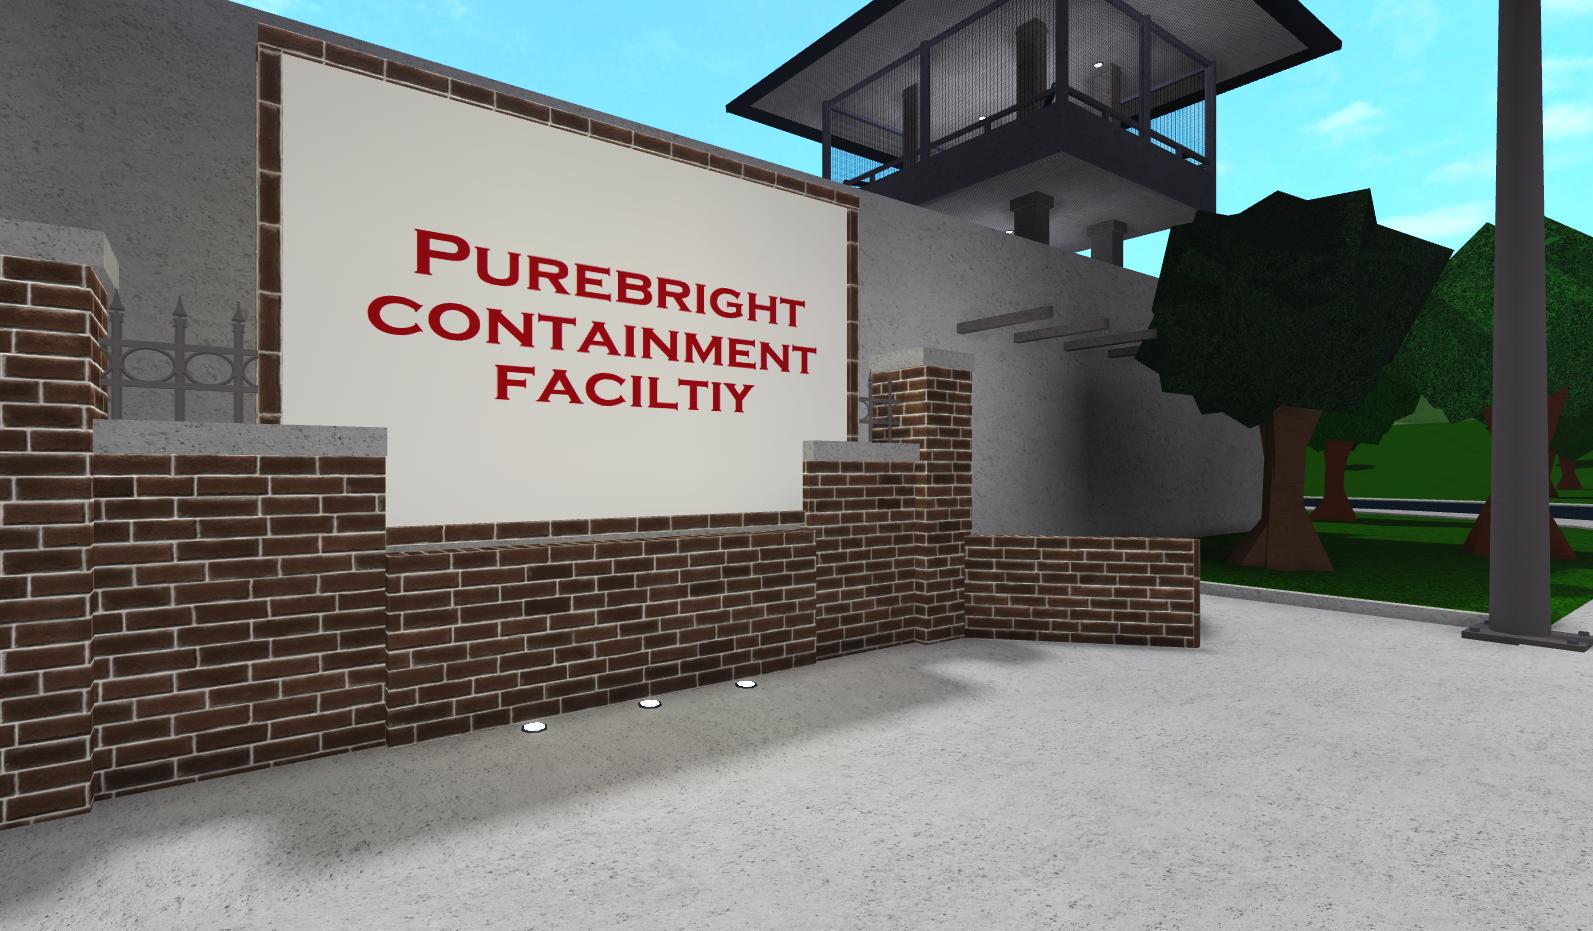 Jo On Twitter Wow All Your Guesses Were Spot On It S An Area 51 And Stranger Things Inspired Type Of Build More Specifically I Present Purebright Containment Facility Roblox Bloxburg Bloxburgbuilds - roblox on twitter beep boop circuit breaker httpst